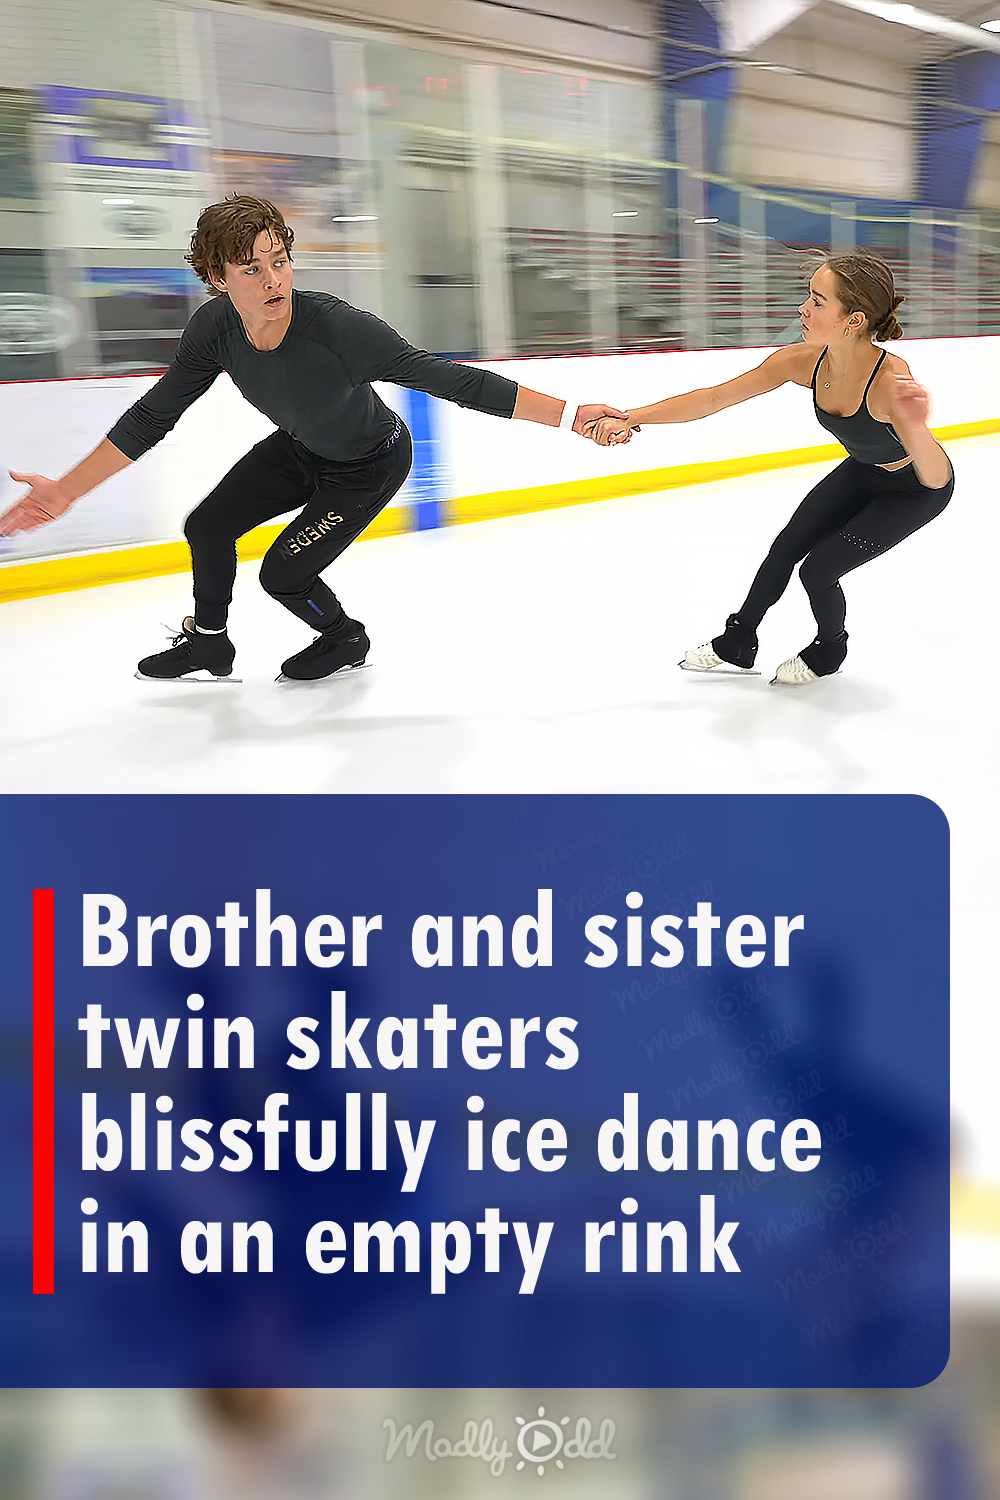 Brother and sister twin skaters blissfully ice dance in an empty rink